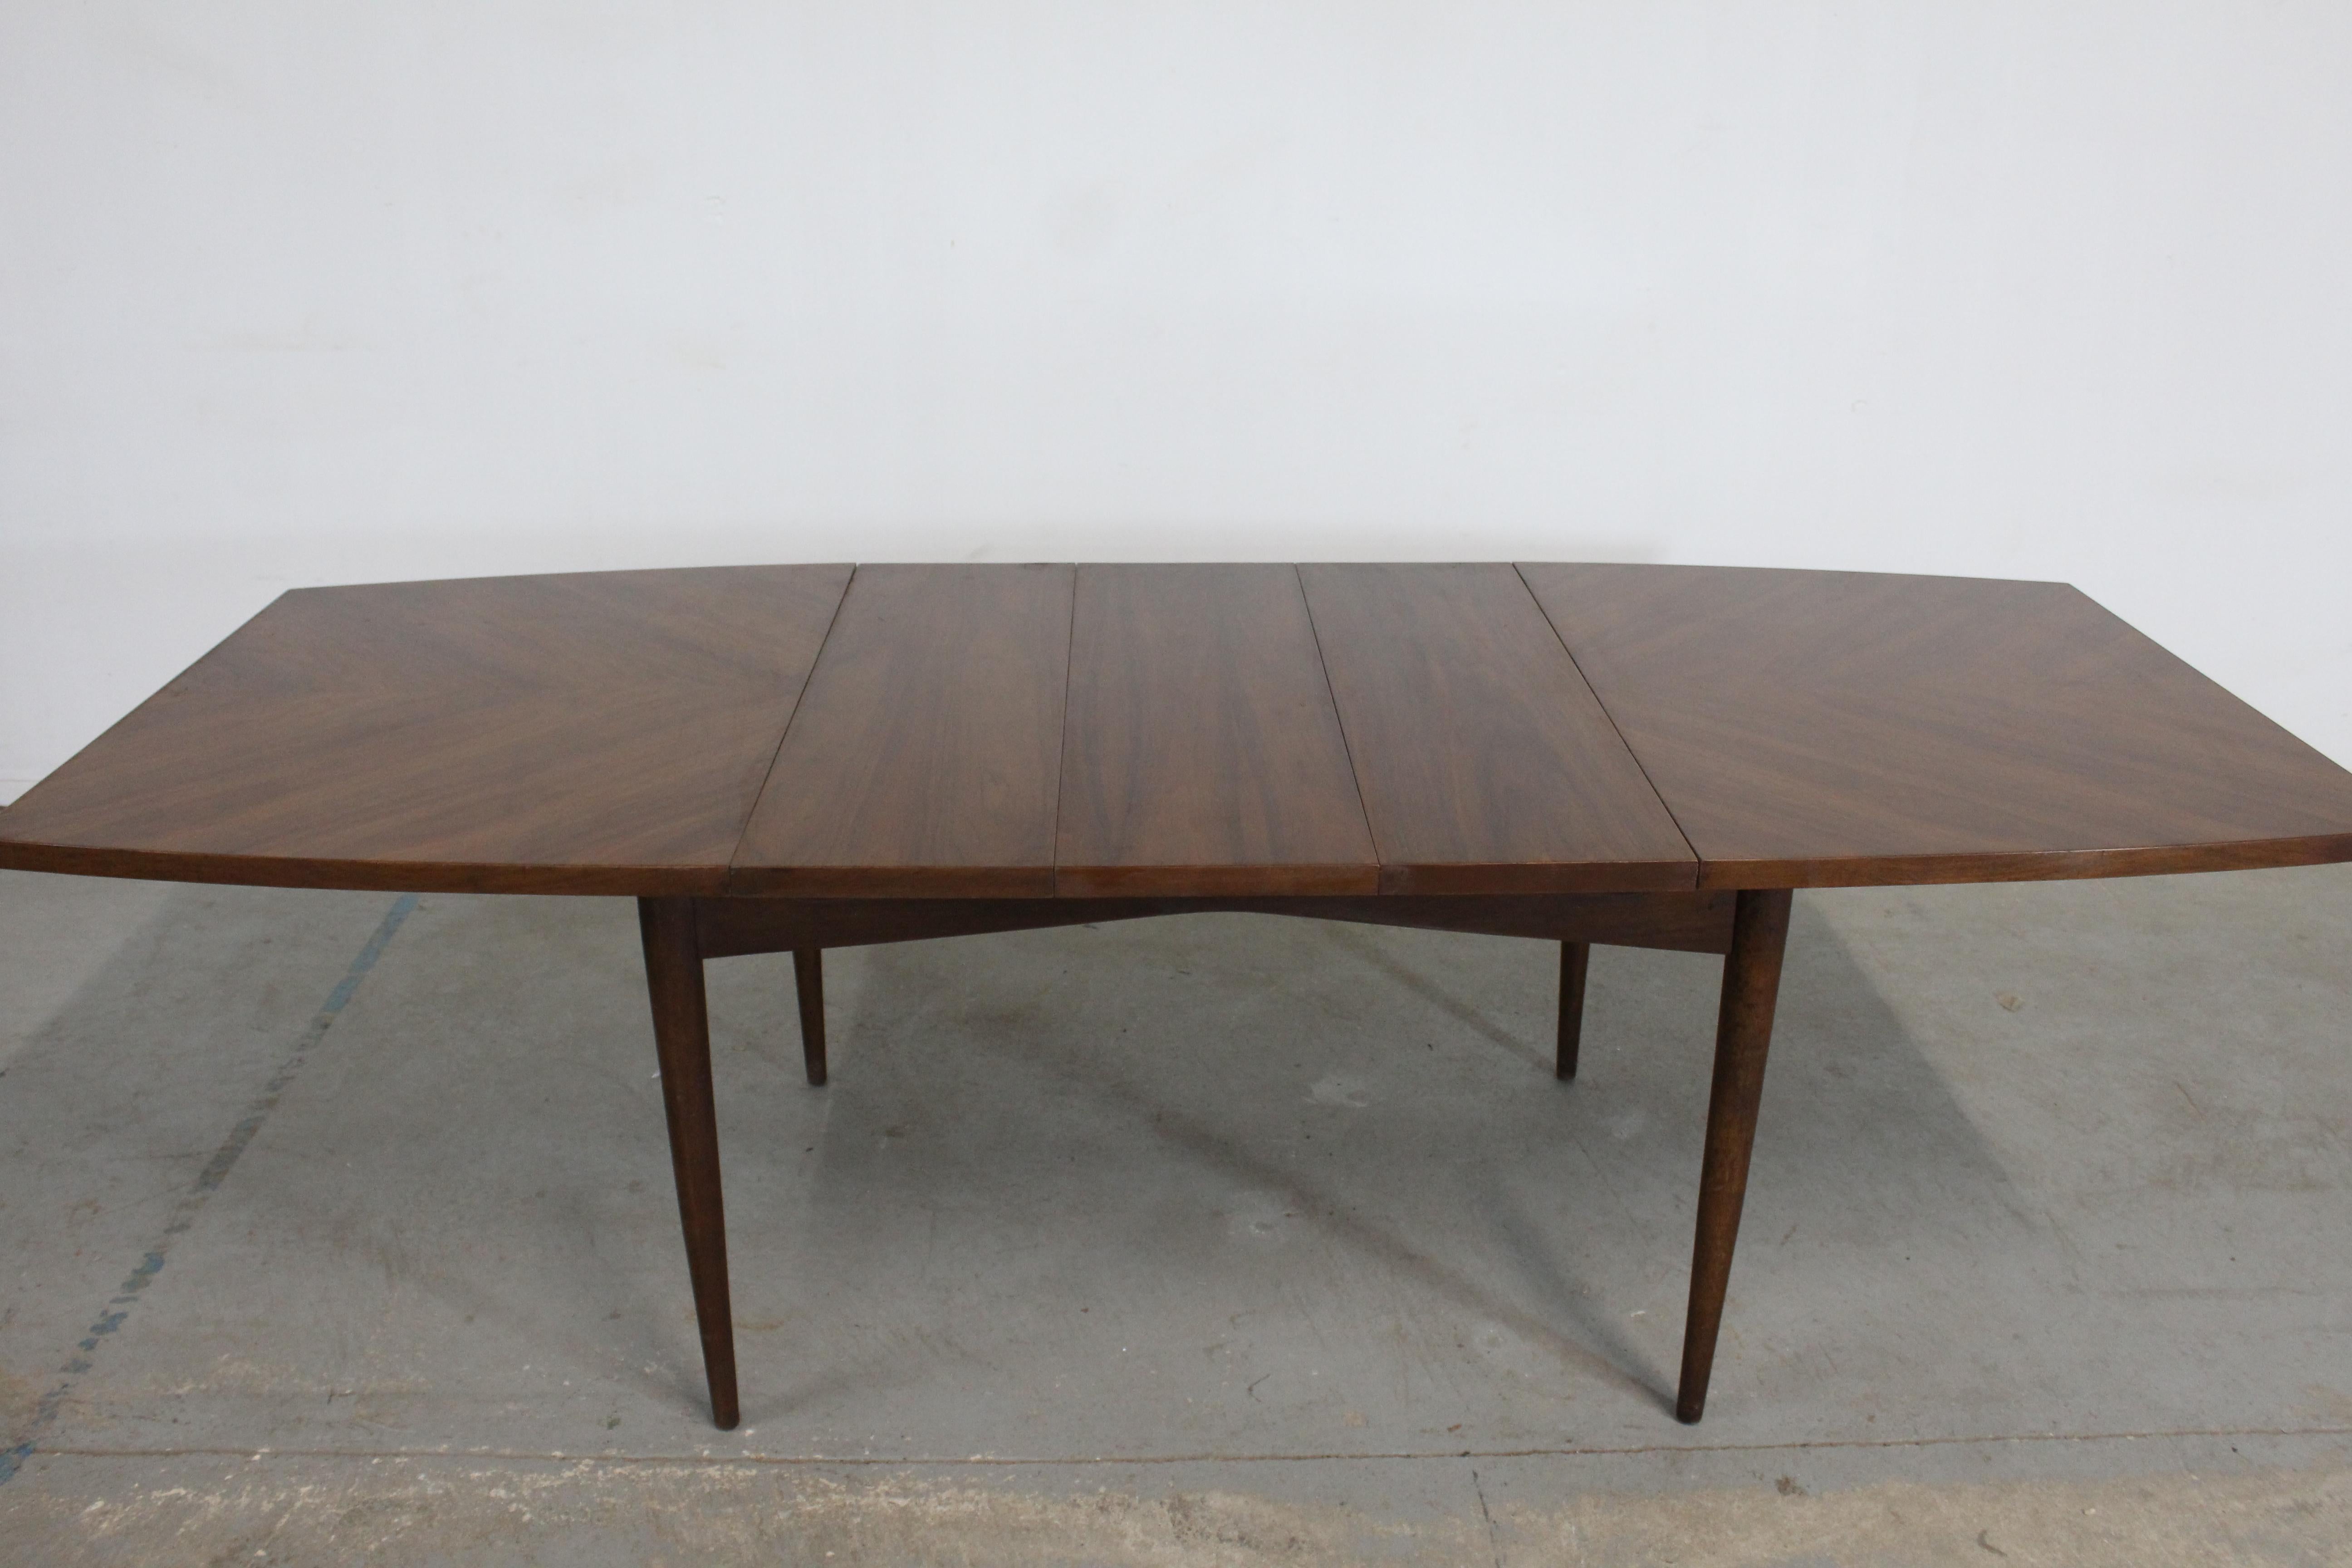 Mid-Century Modern American of Martinsville surfboard walnut dining table w 3 extensions
Offered is a Mid-Century Modern surfboard walnut dining table w 3 extensions. The table is by American of Martinsville. This table is prefect for city living